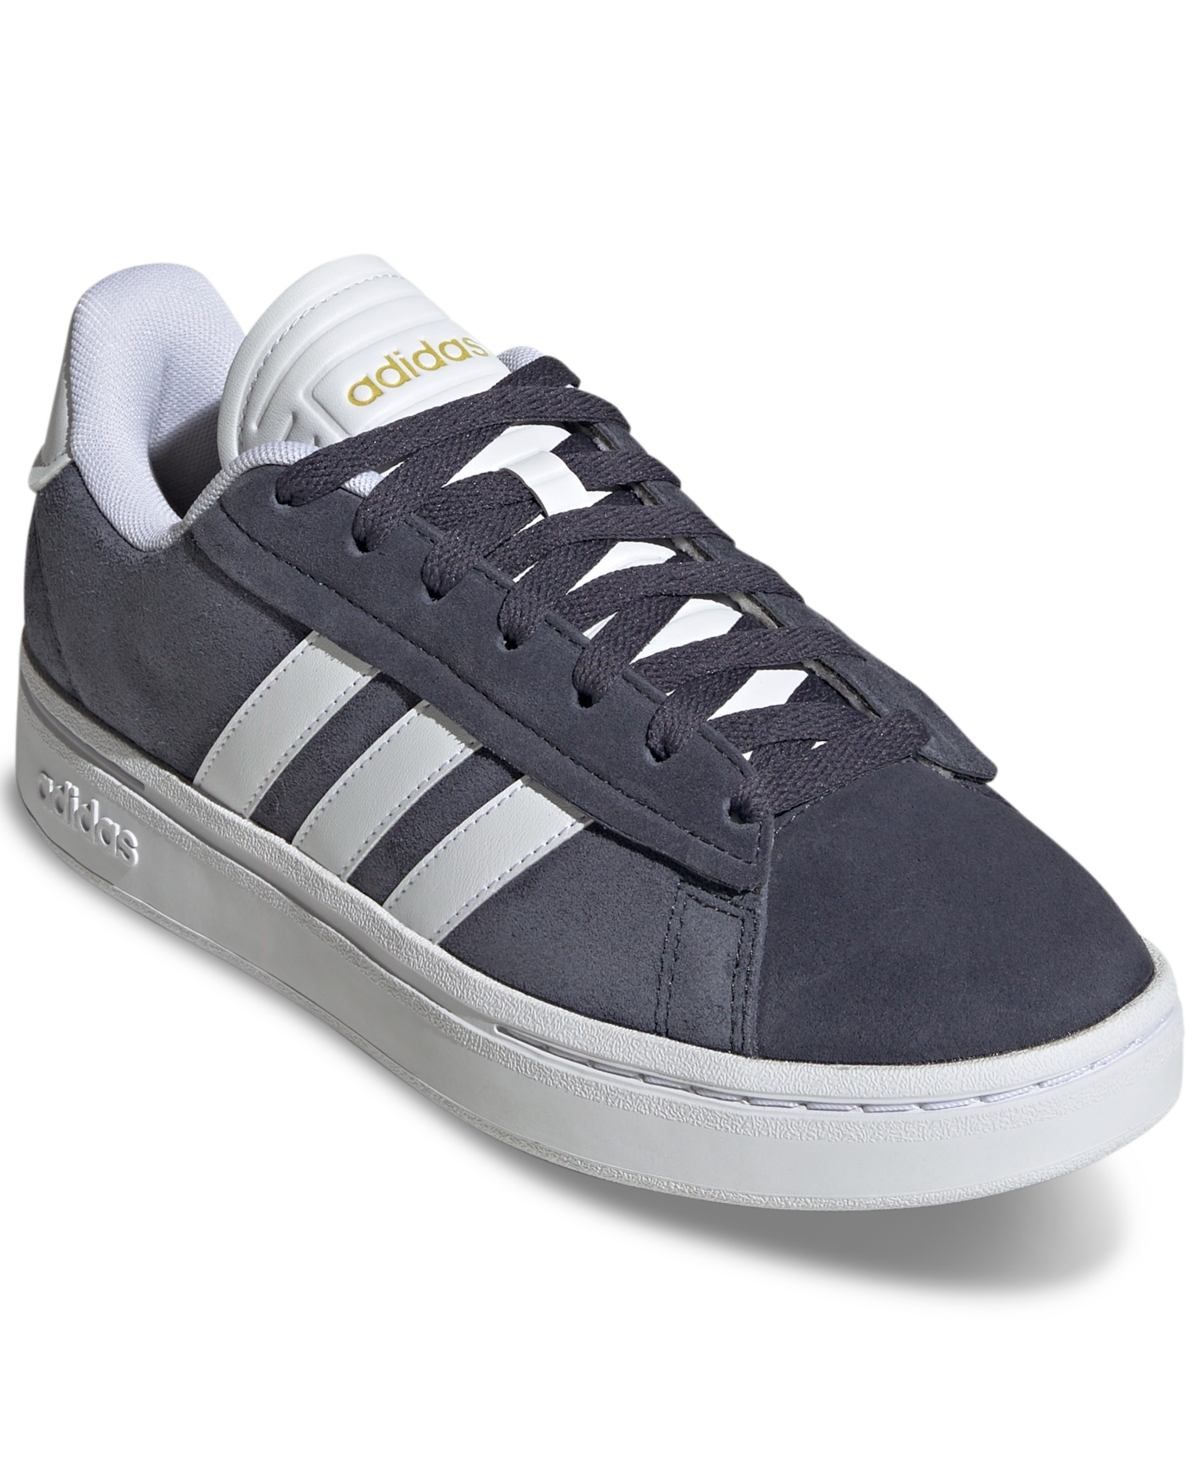 Adidas Originals Women's Grand Court Alpha Cloudfoam Lifestyle Comfort Casual Sneakers From Finish Line In Shadow Navy,white,gold